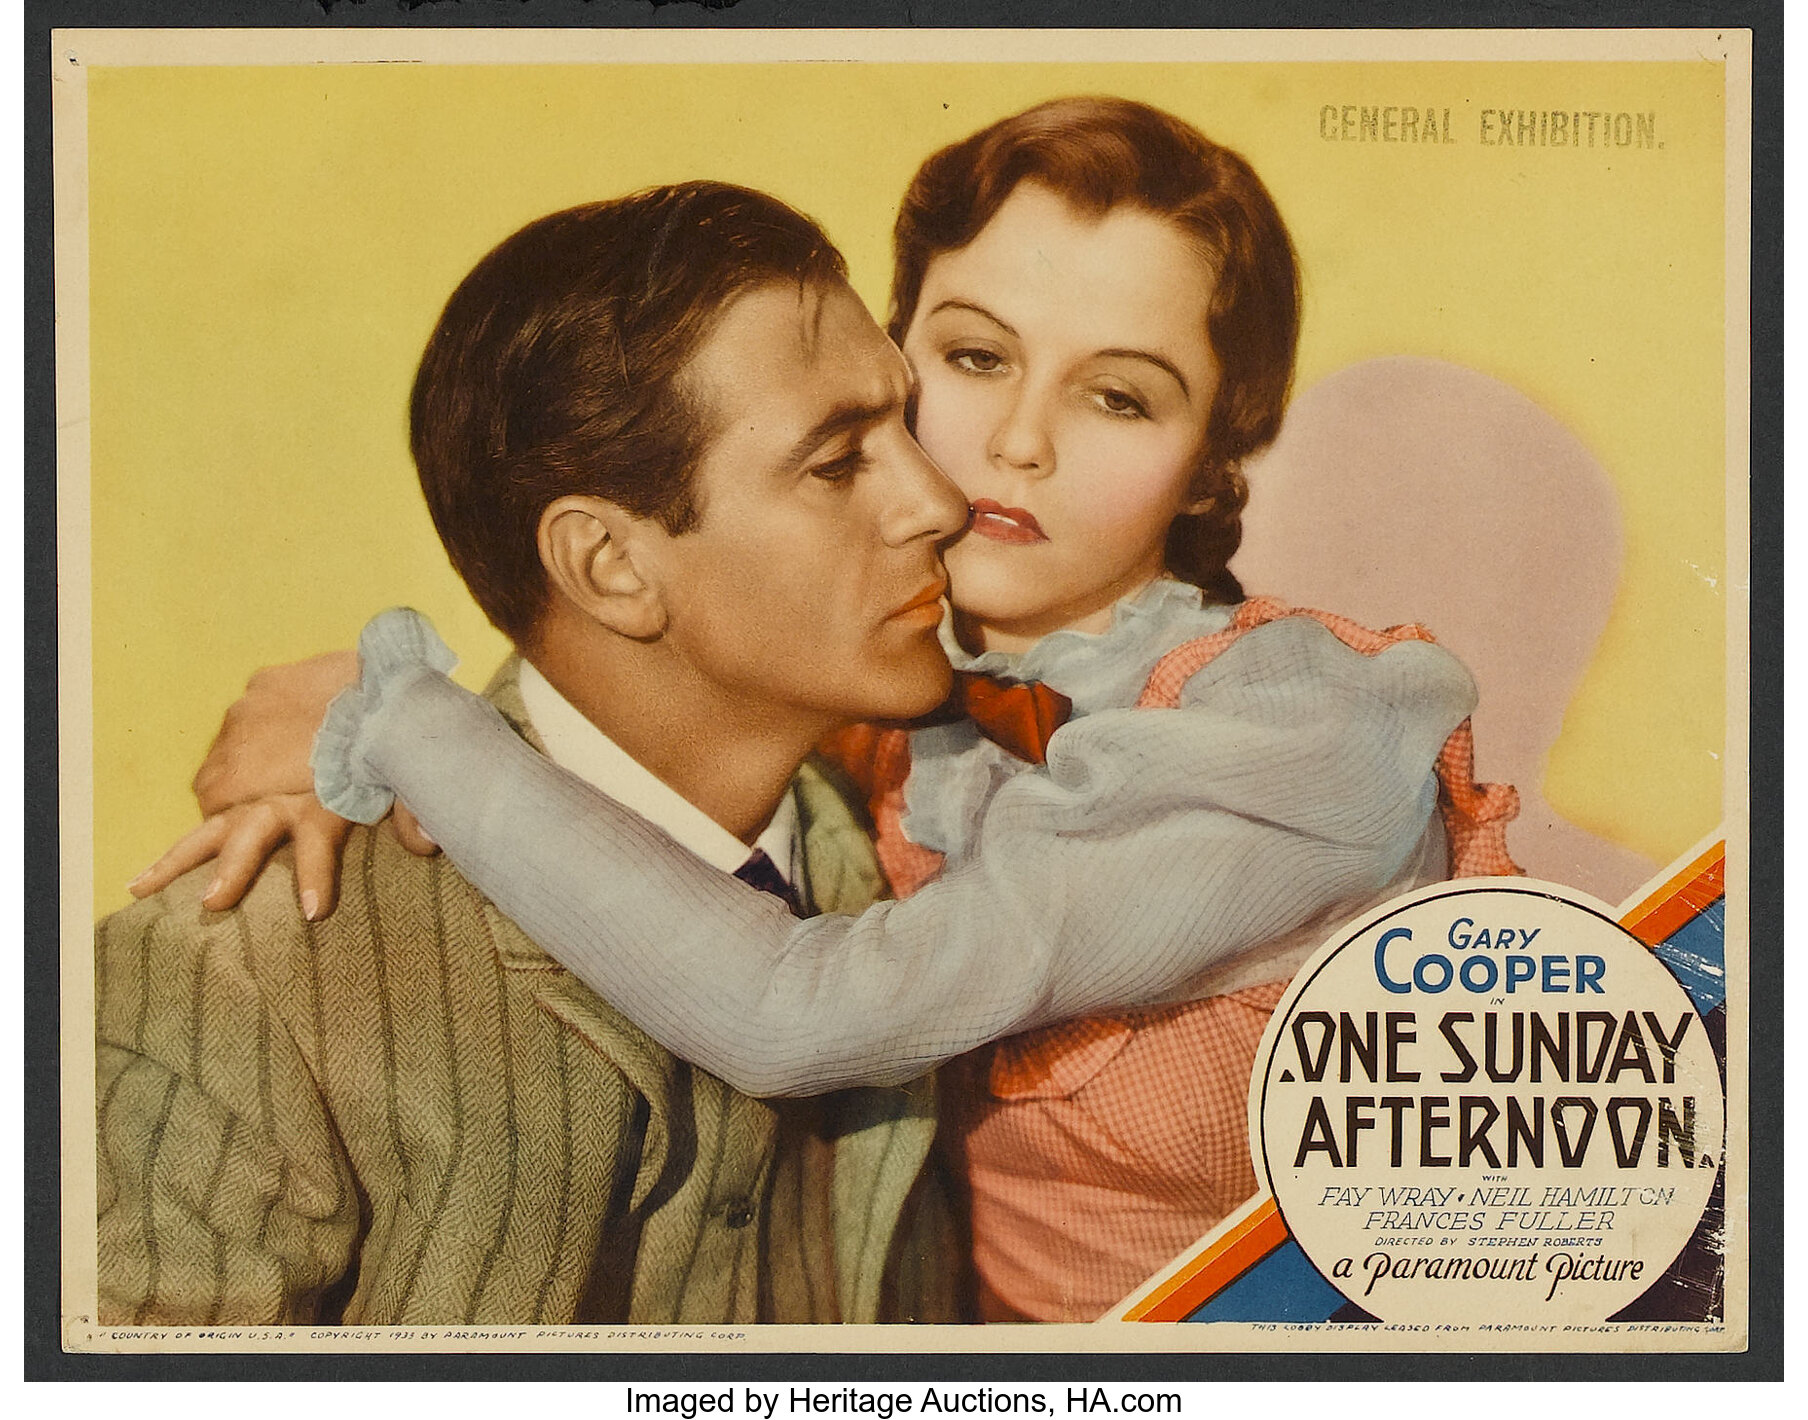 One Sunday Afternoon Paramount 1933 Lobby Card 11 X 14 Lot 26264 Heritage Auctions 6054